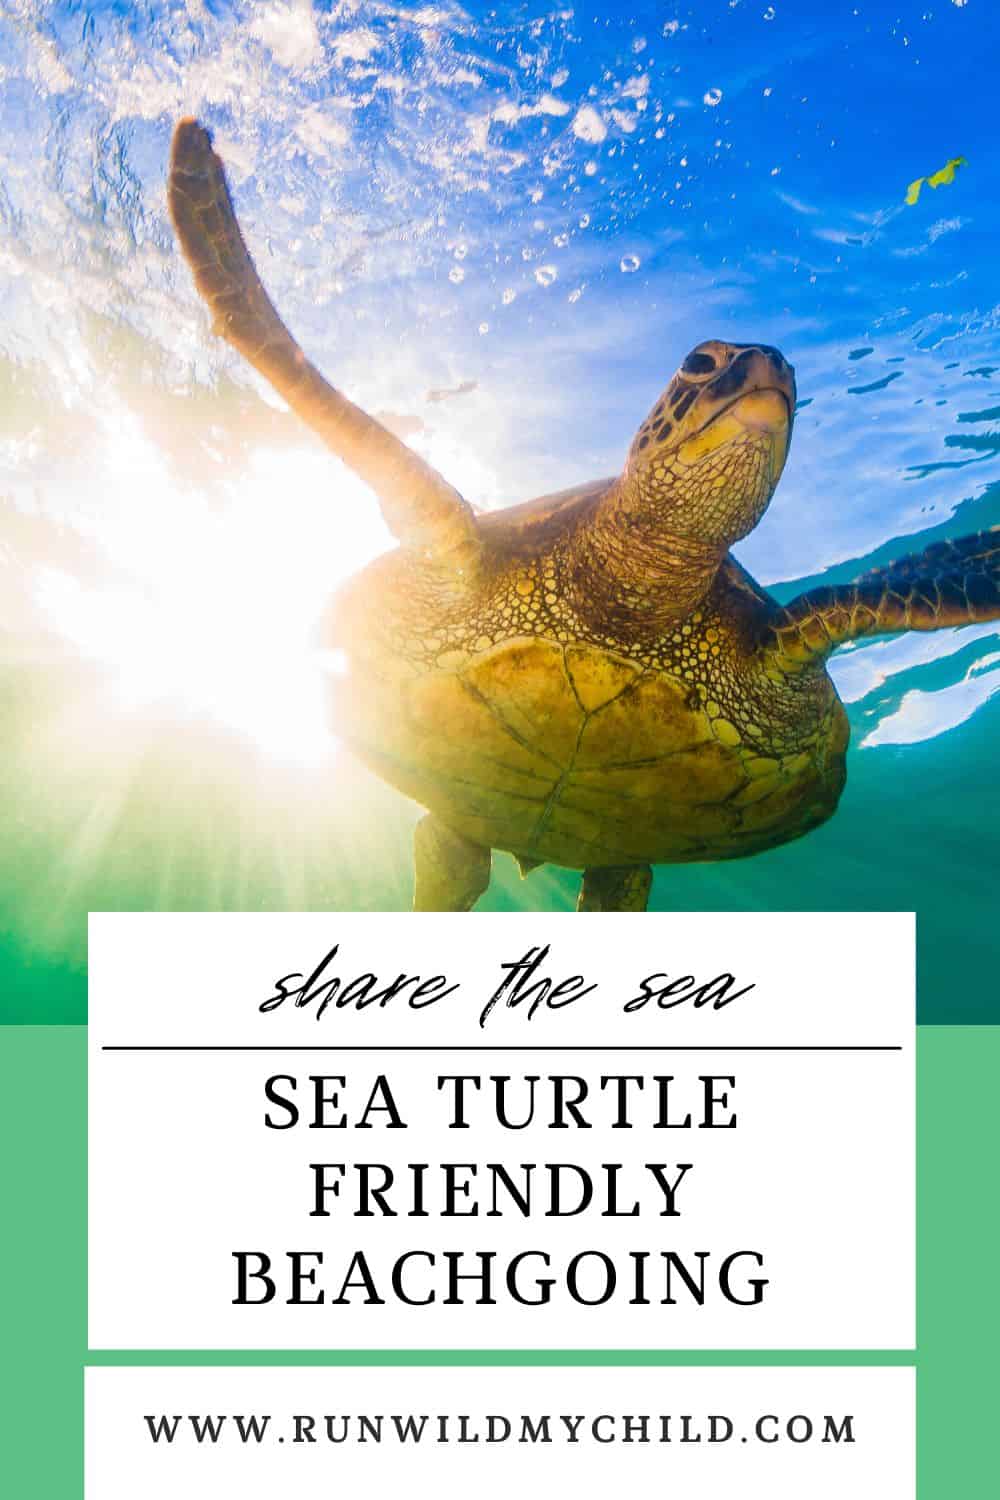 sea turtle friendly beachgoing - how to protect and respect sea turtles when you're at the beach